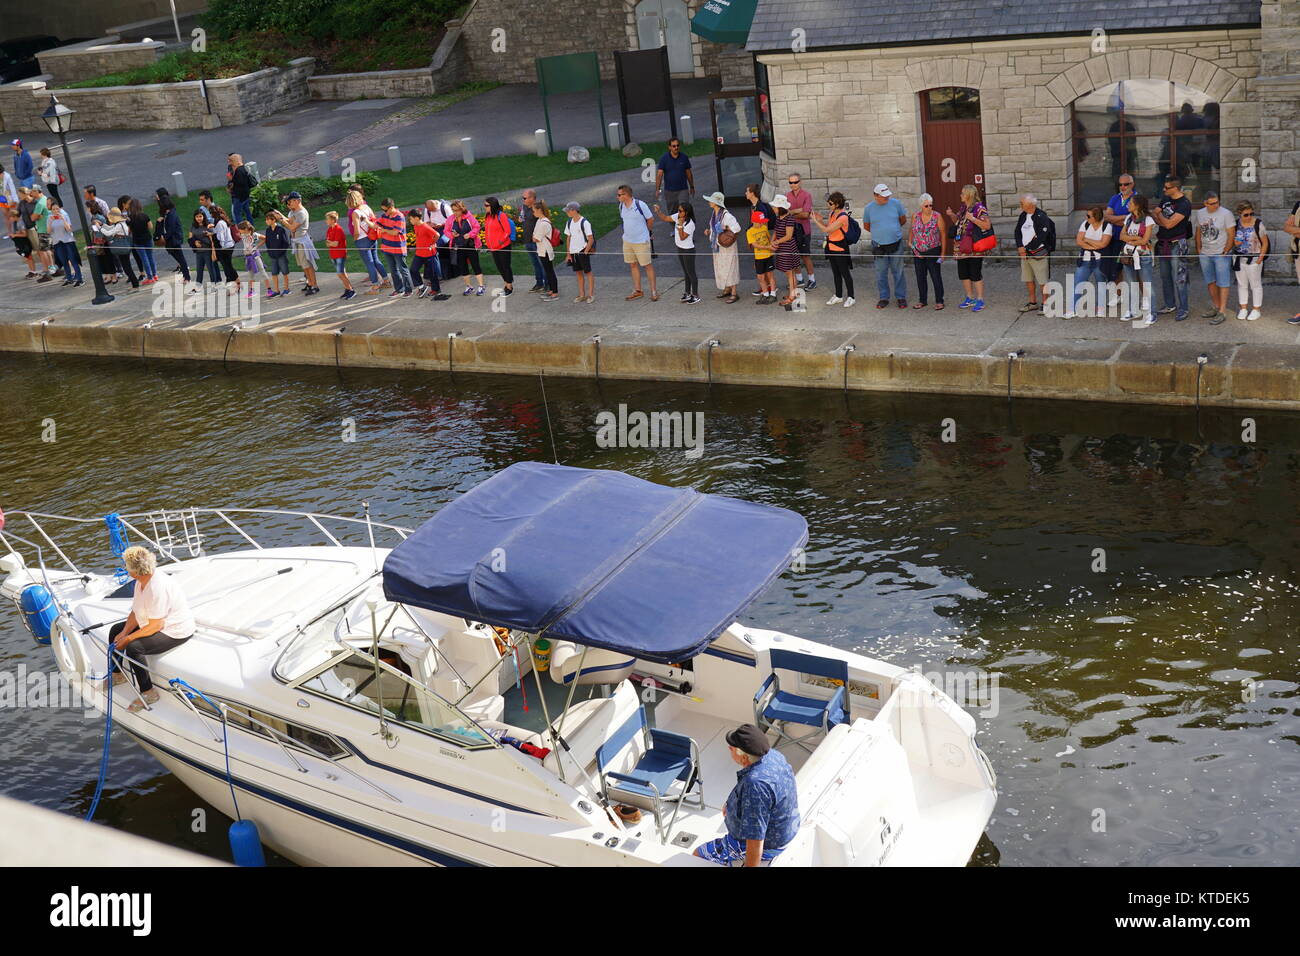 A crowd of visitors at the Rideau Canal, a national historic site in Ottawa, Canada Stock Photo